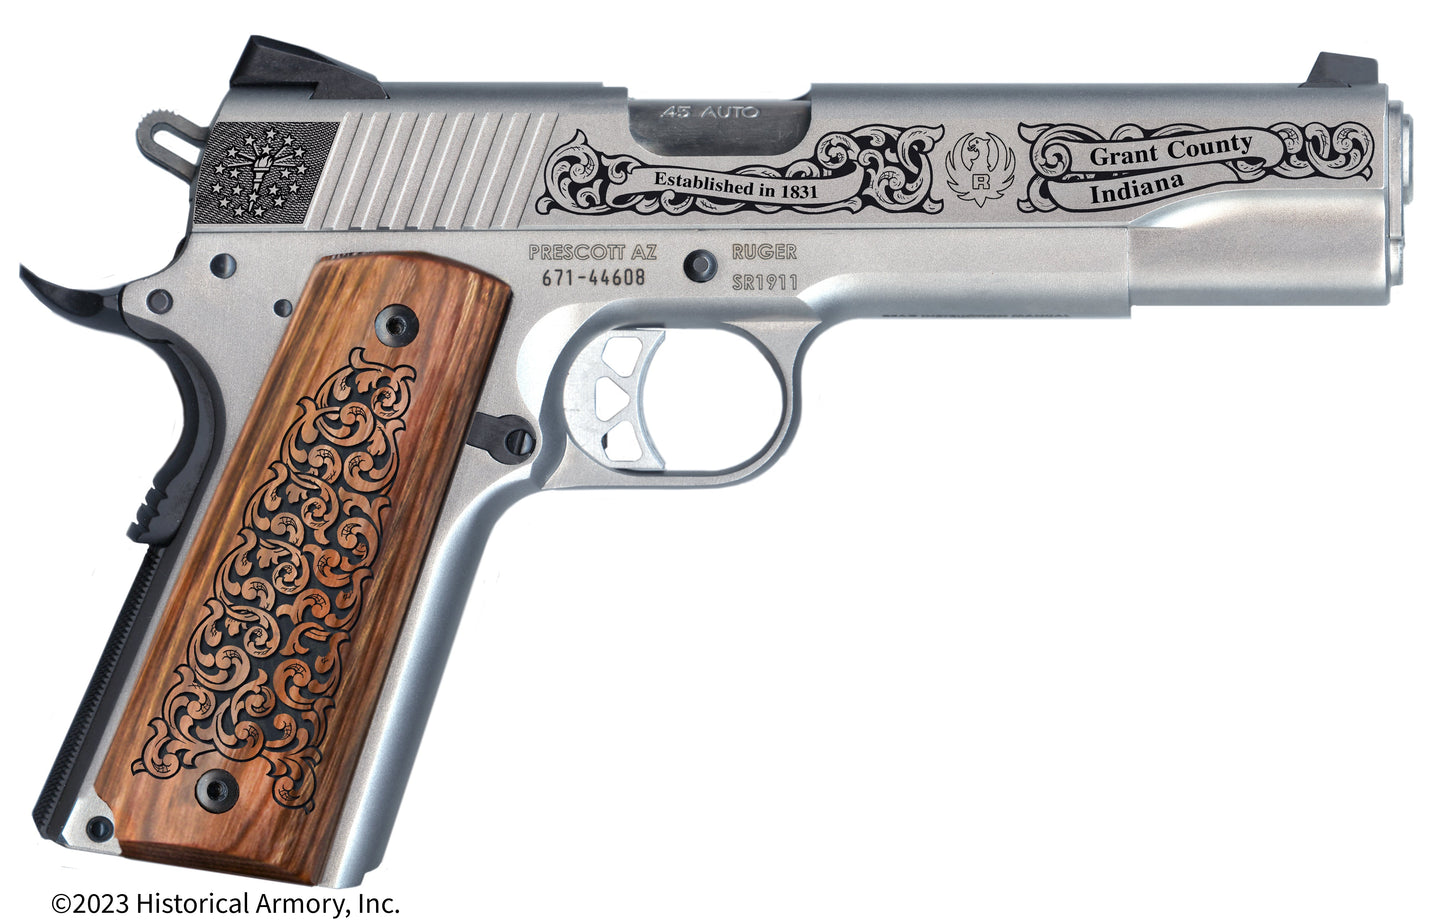 Grant County Indiana Engraved .45 Auto Ruger 1911